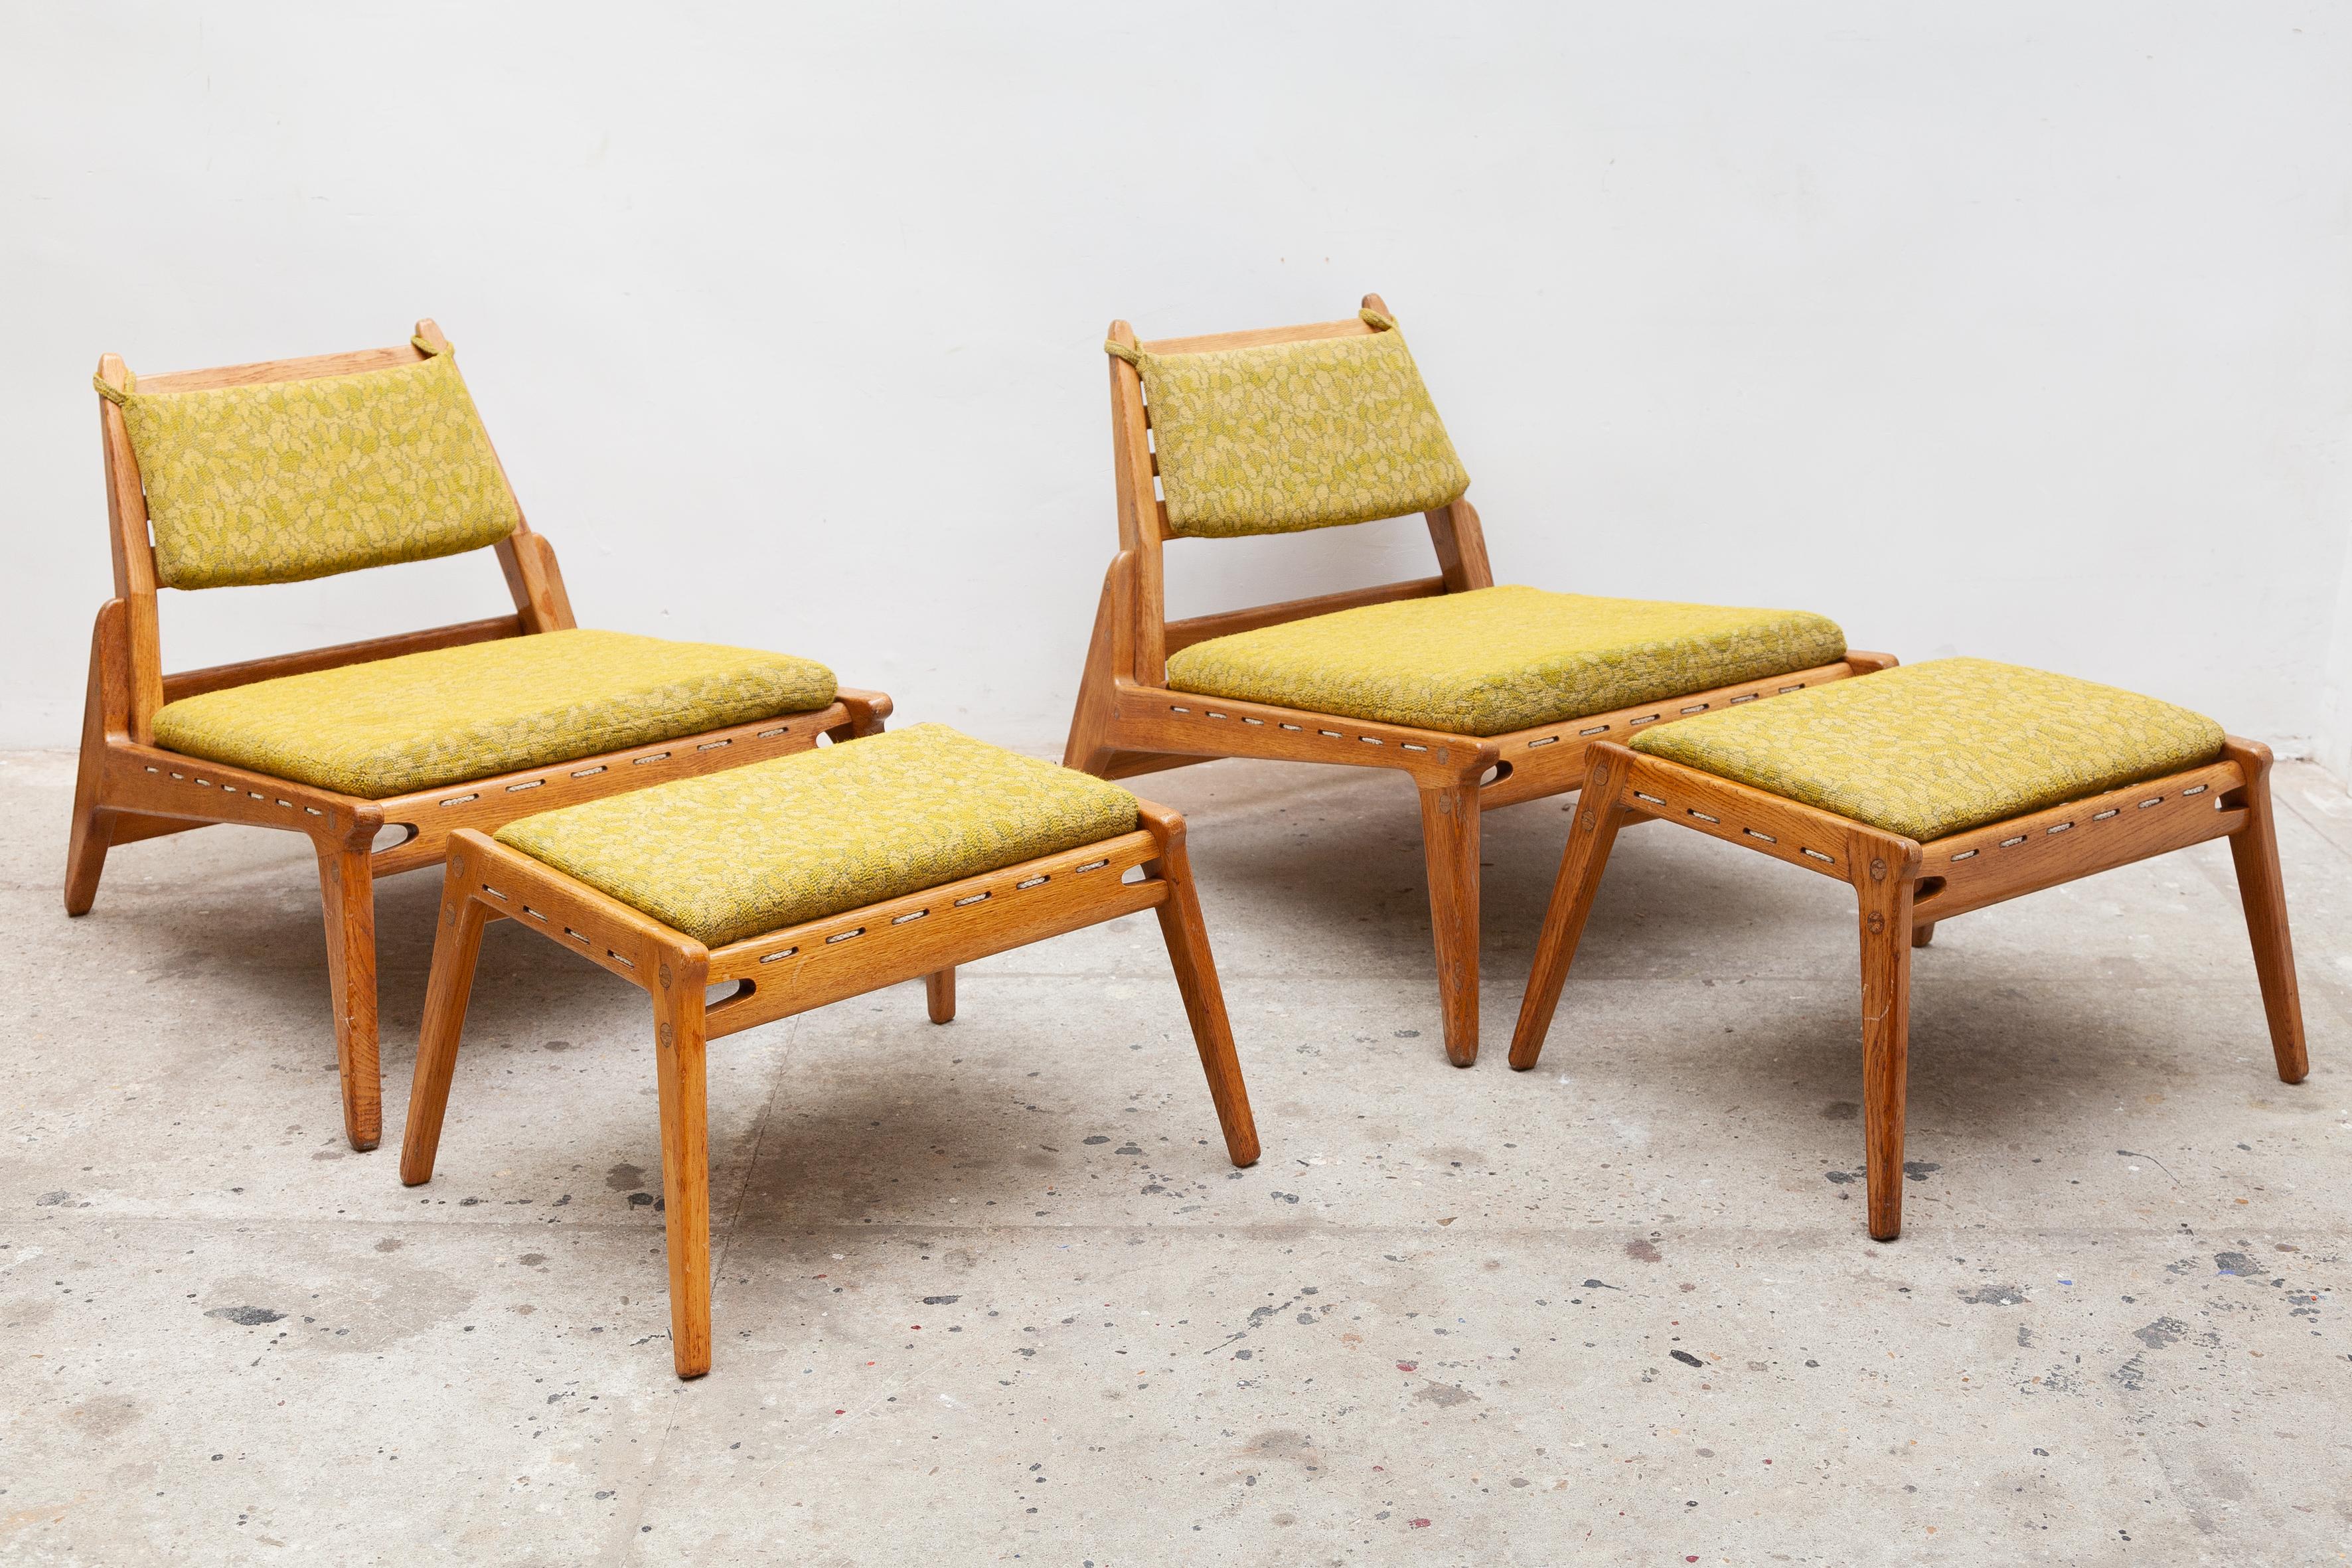 A pair of sculptural Hunting chairs with ottoman in green original upholstery and stained oak, Germany, 1950s. These Hunting chairs show a very elegant and minimal design with great craftsmanship. An open character is created by the beautiful shapes